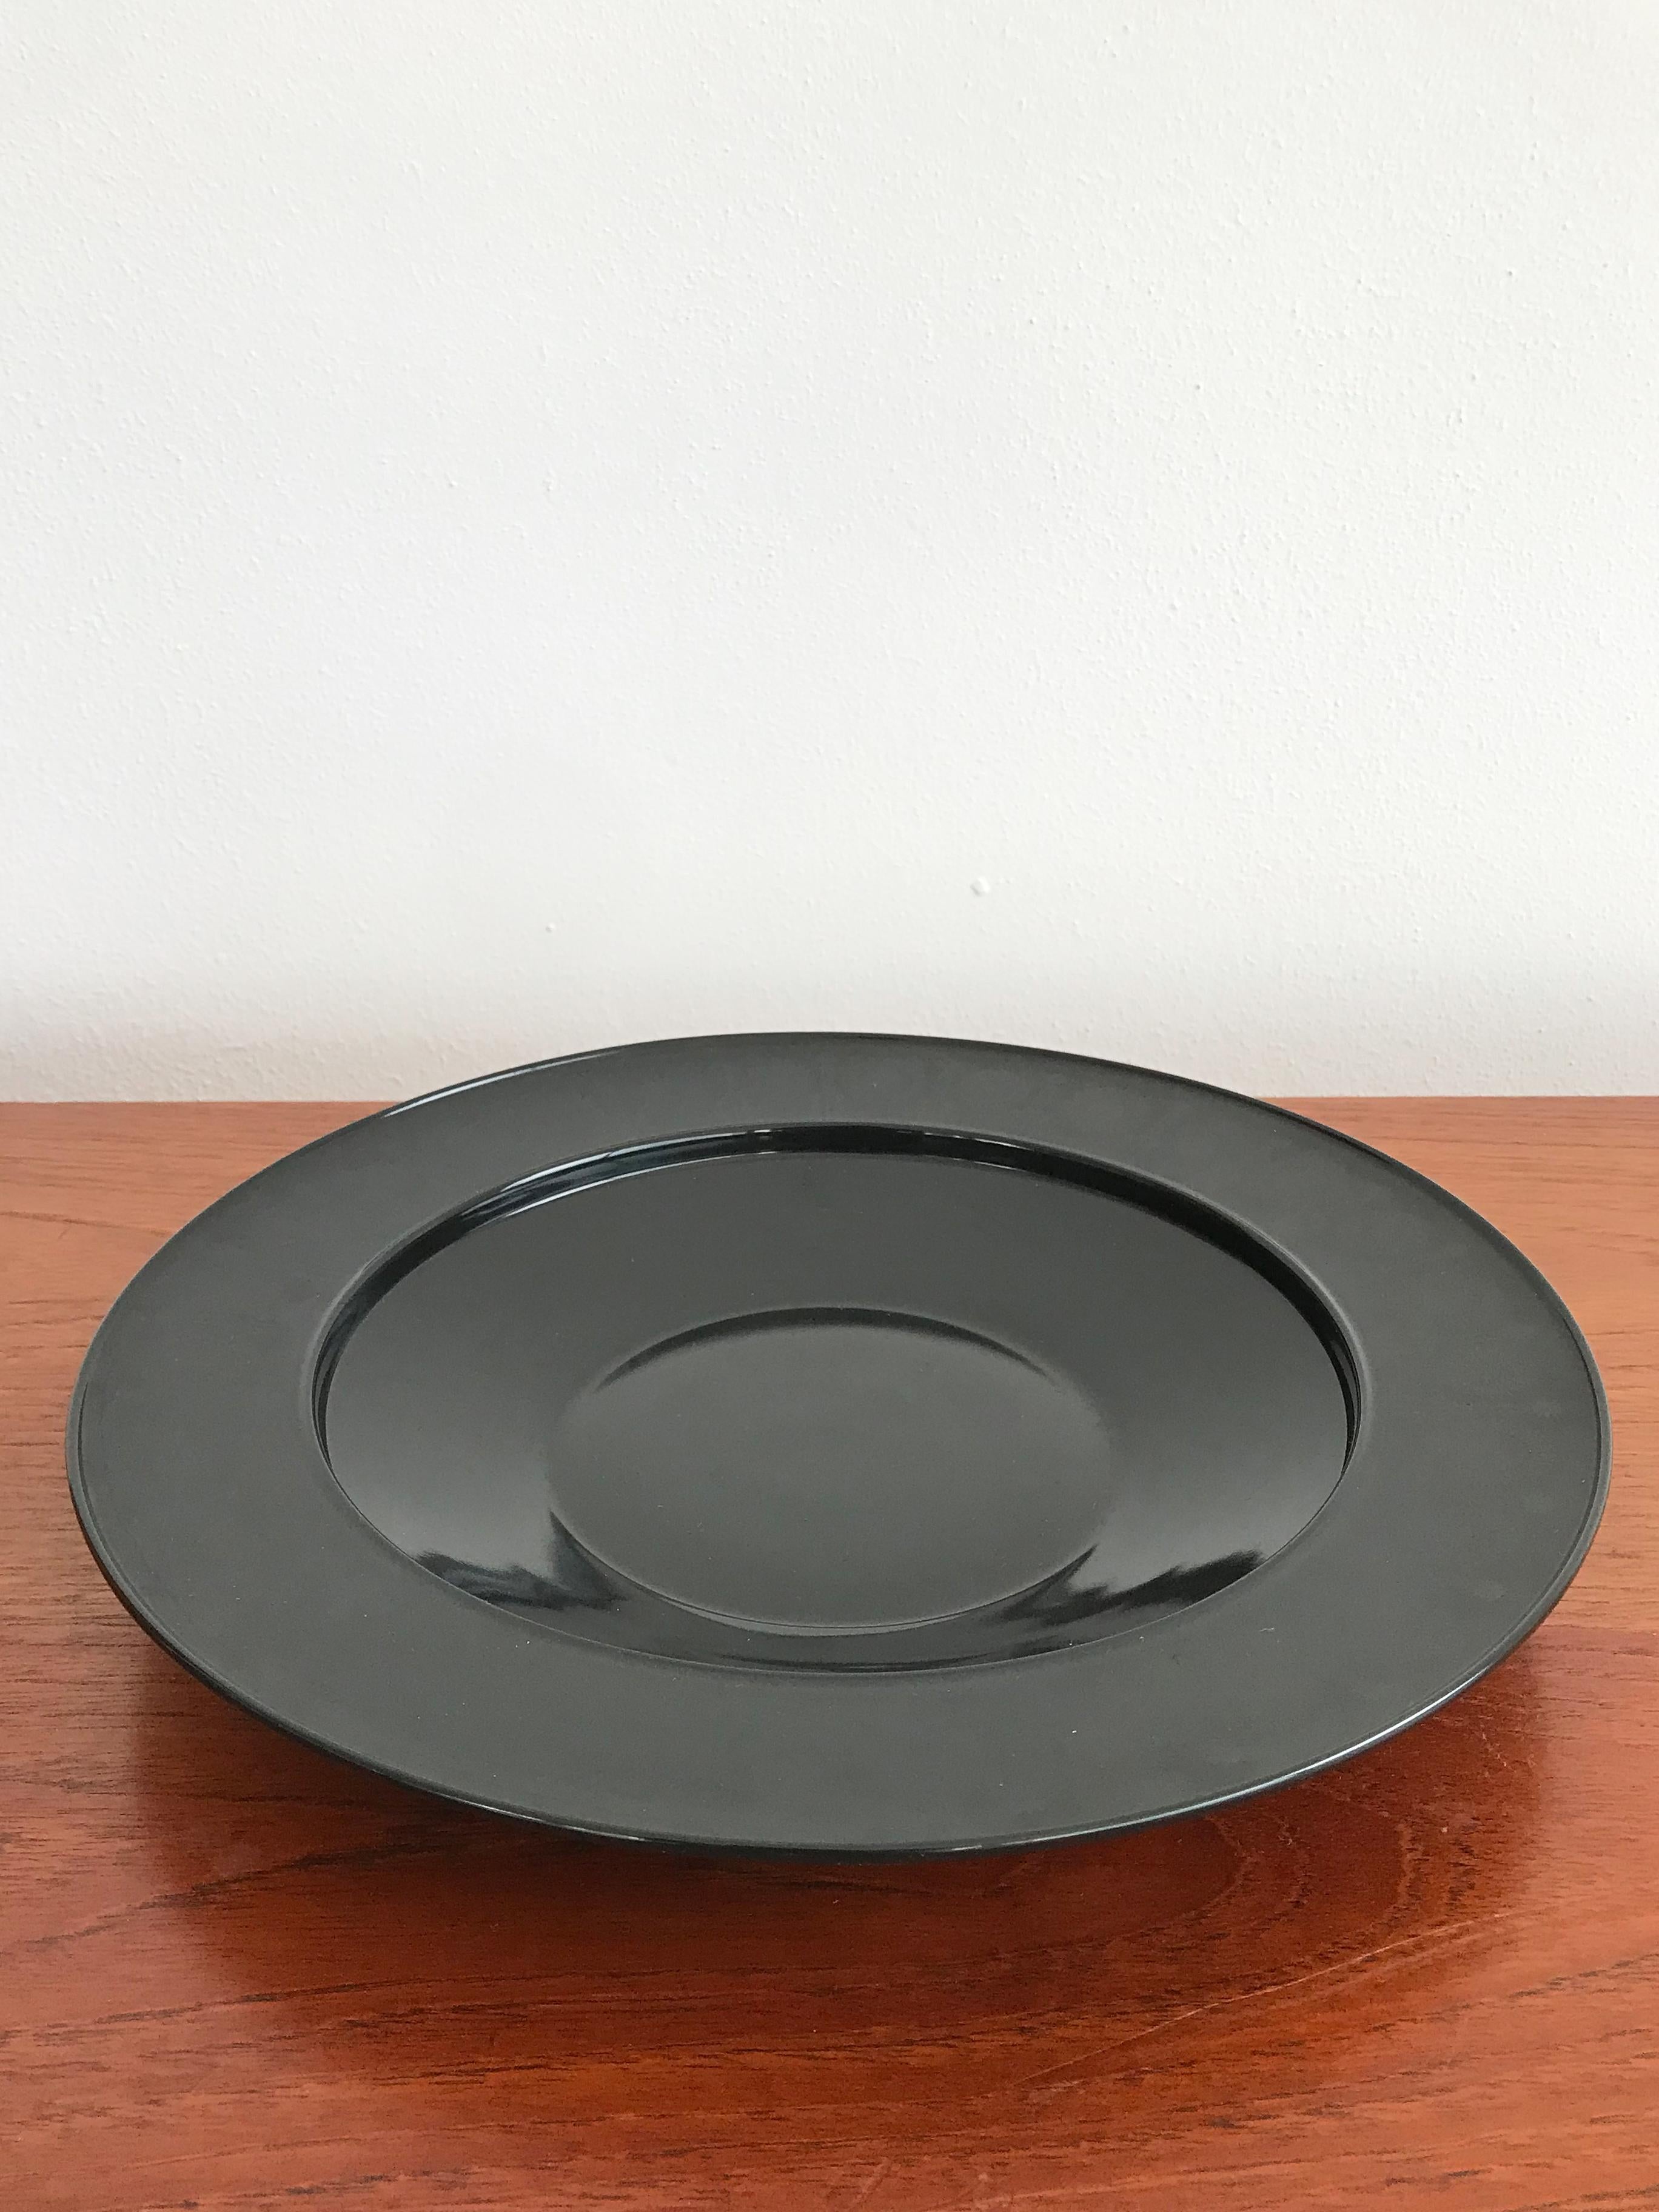 Centerpiece, fruit bowl, plate in black porcelain, vintage modernism,
designed by Tapio Wirkkala for Rosenthal Studio Linie “Porcelaine Noire” serie with tone-on-tone decoration on the rim,
Germany 1970s
Signed under the base “Rosenthal